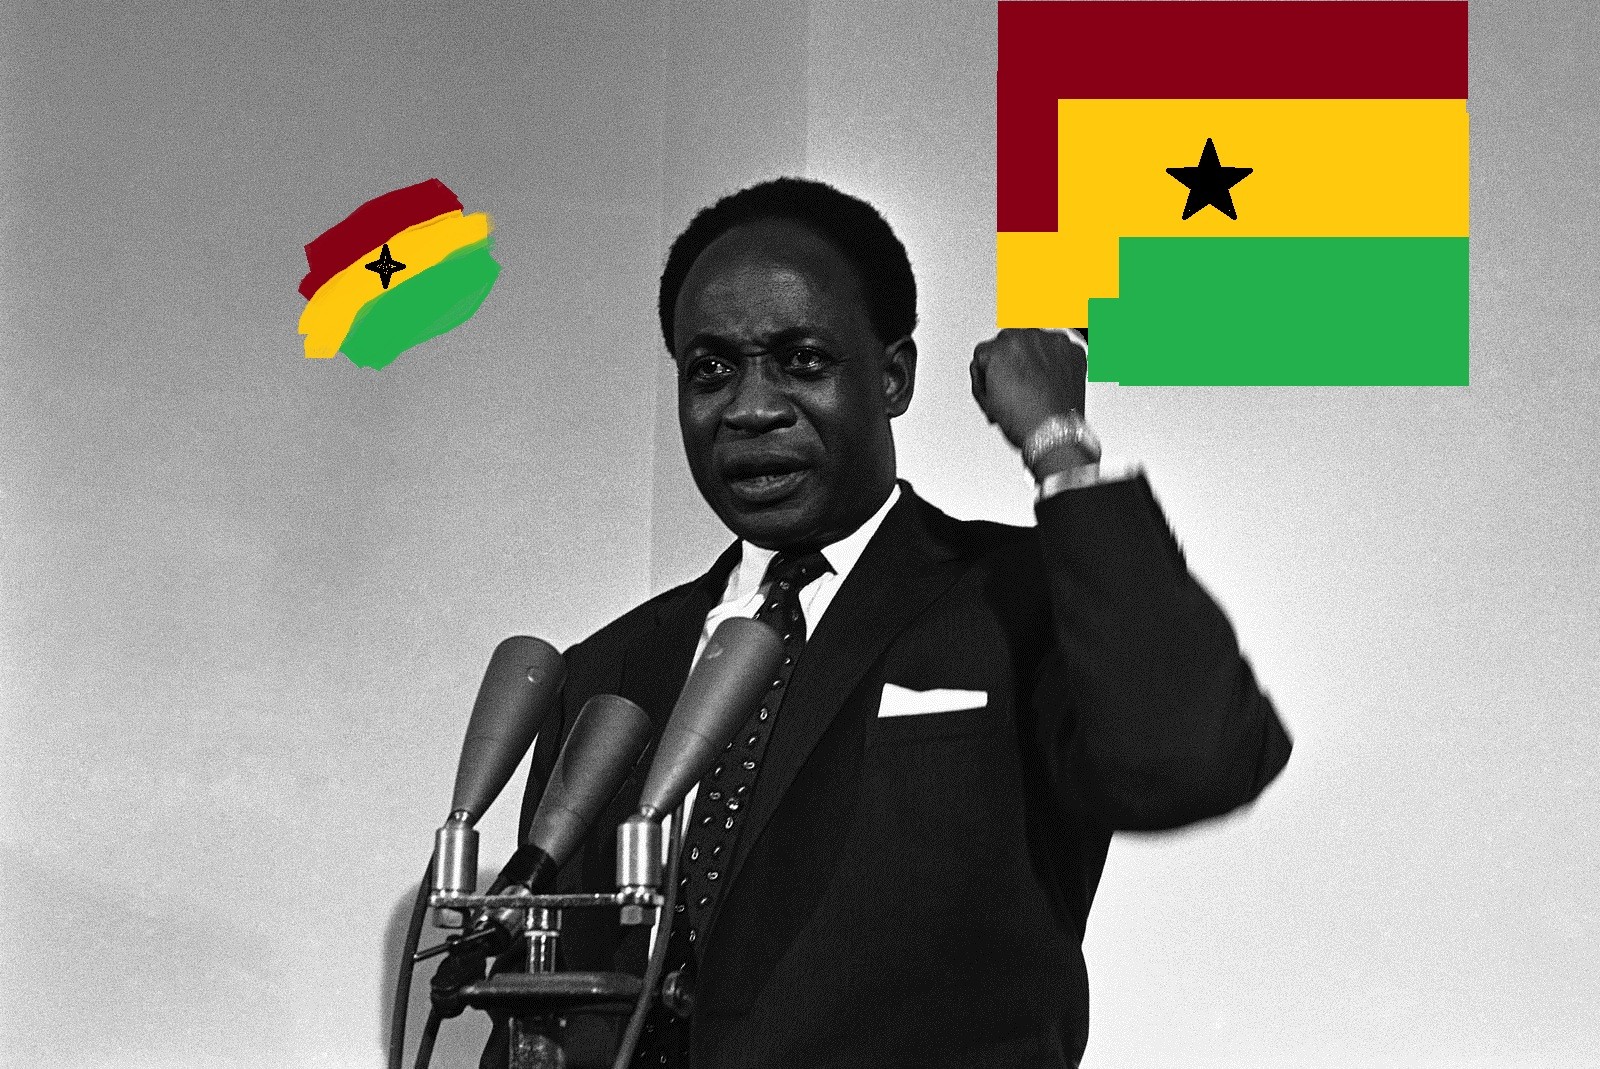 Monday Sept 21 is Nkrumah memorial holiday